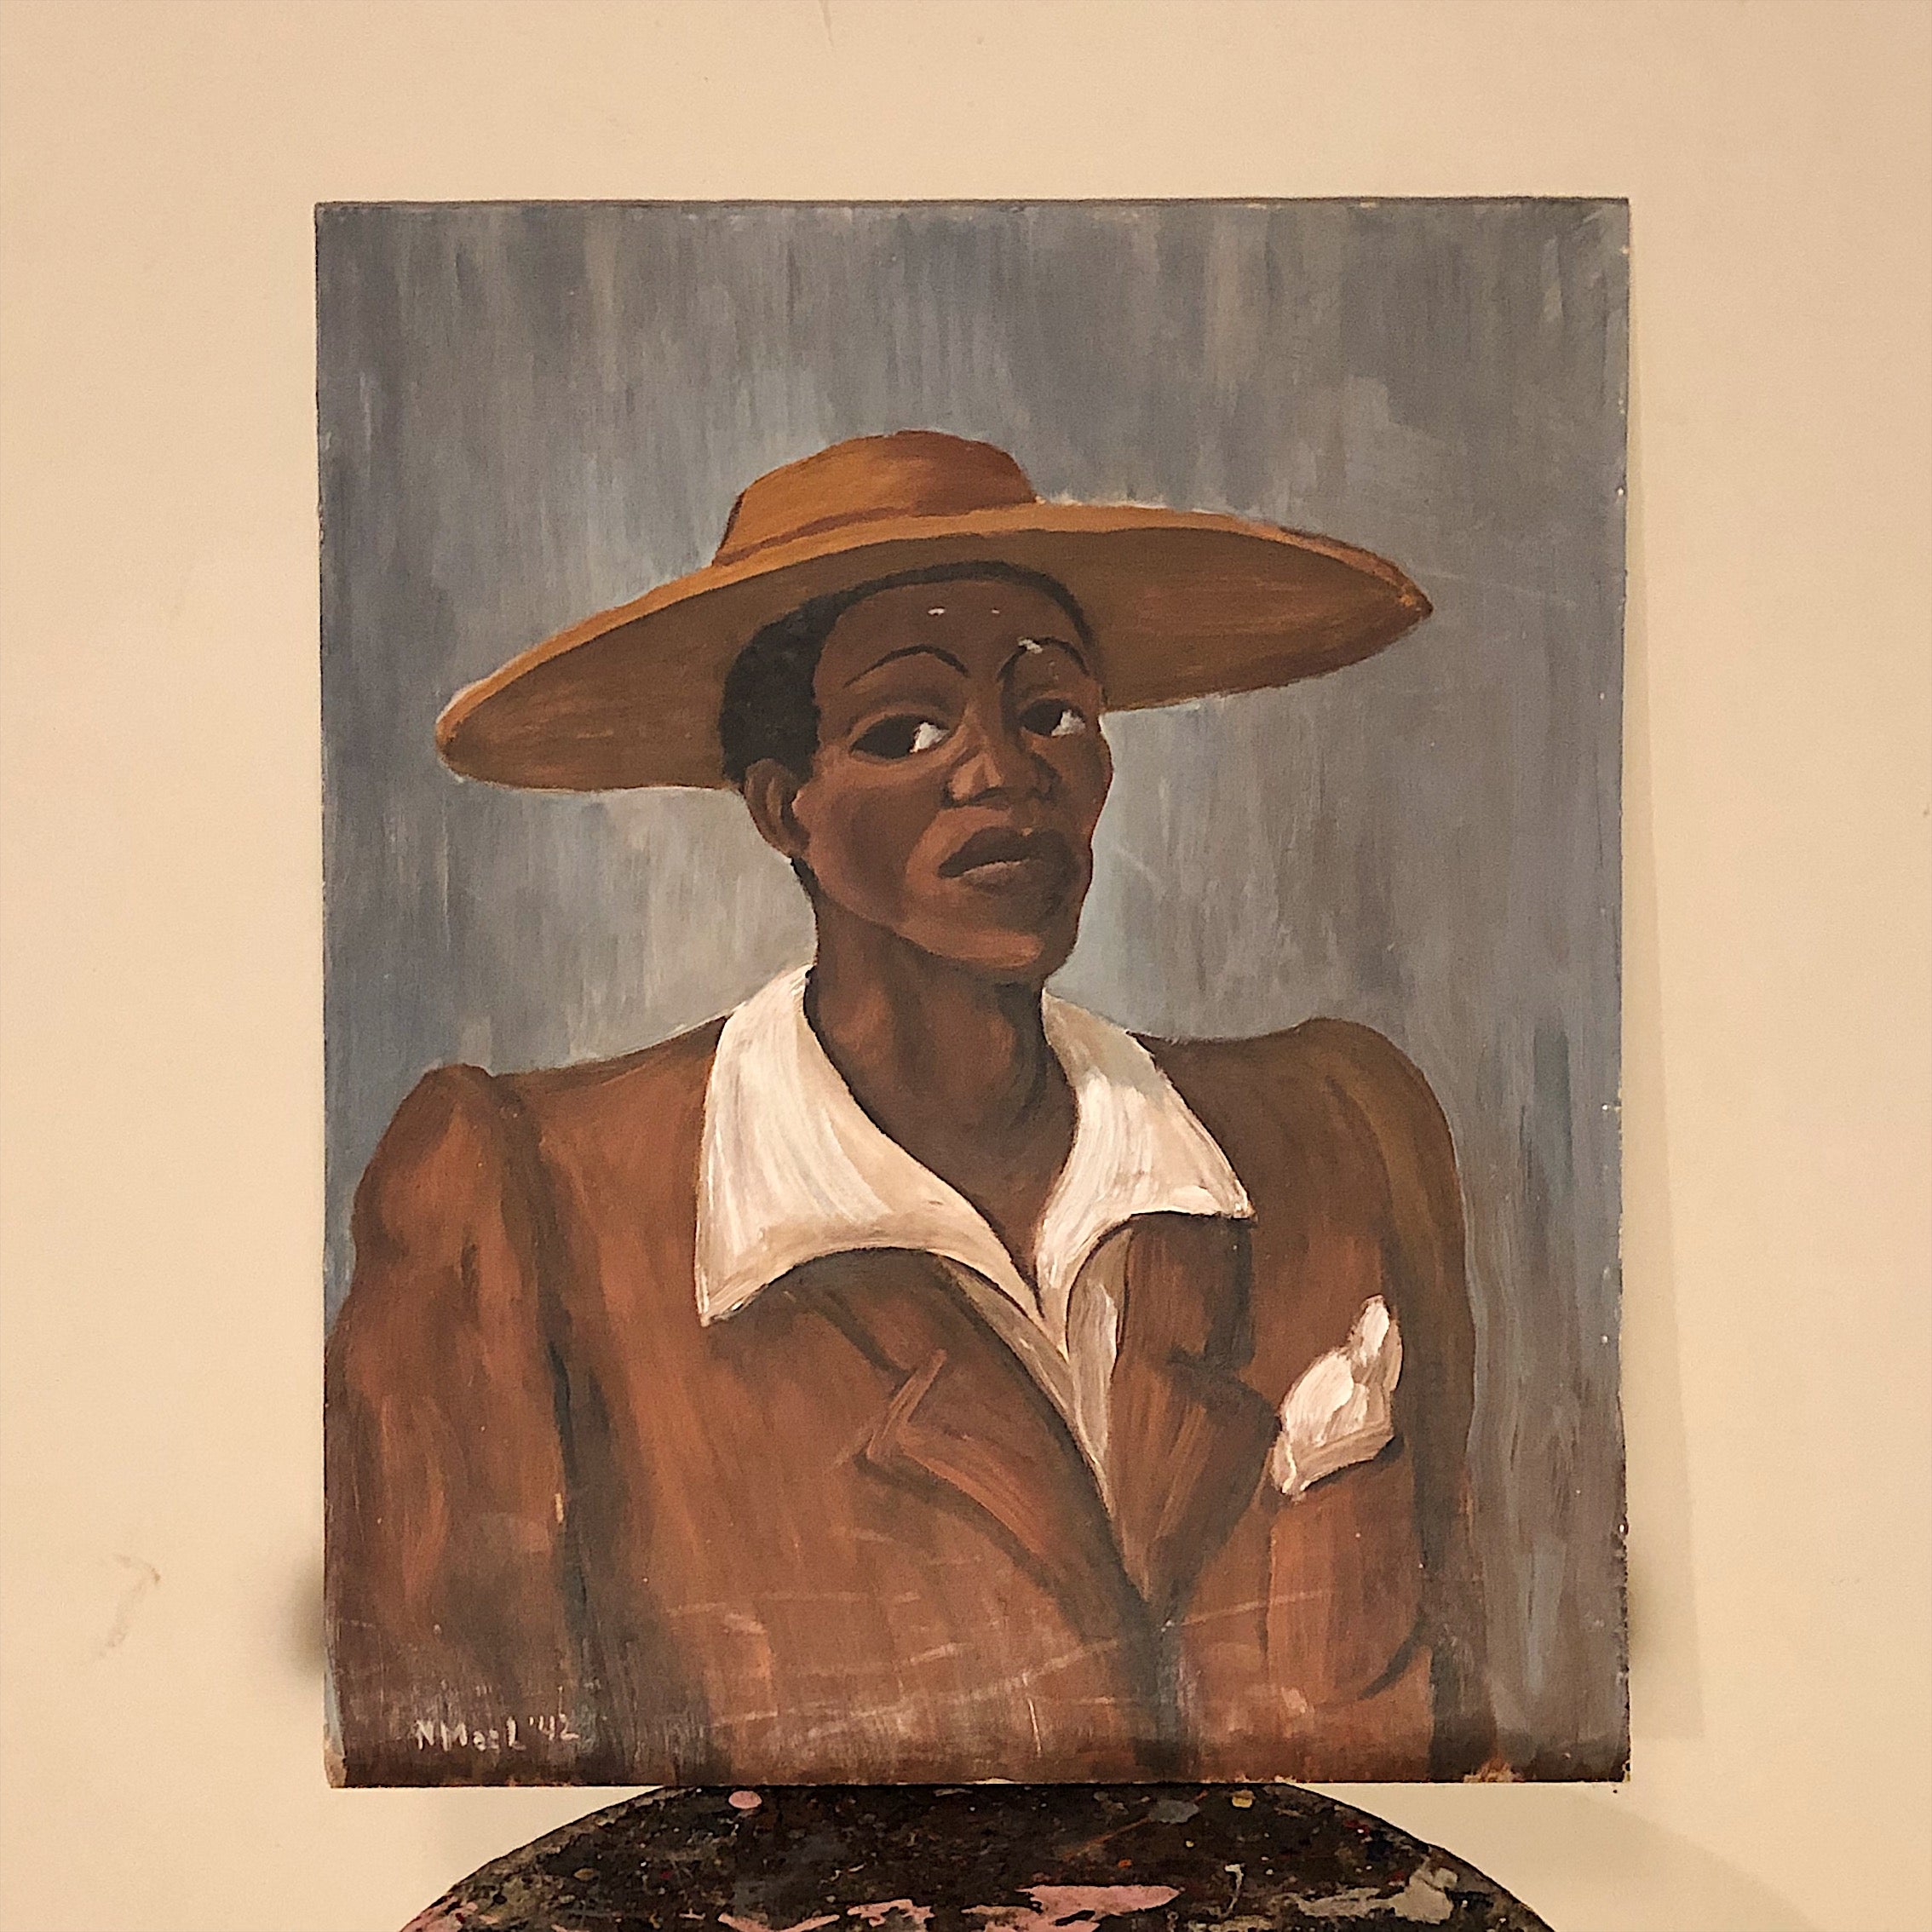 WPA Era Painting of African American Man in Zoot Suit - 1942 - Signed "N. Mael" - Pre Riots - Rare Subject Matter - 17 x 14